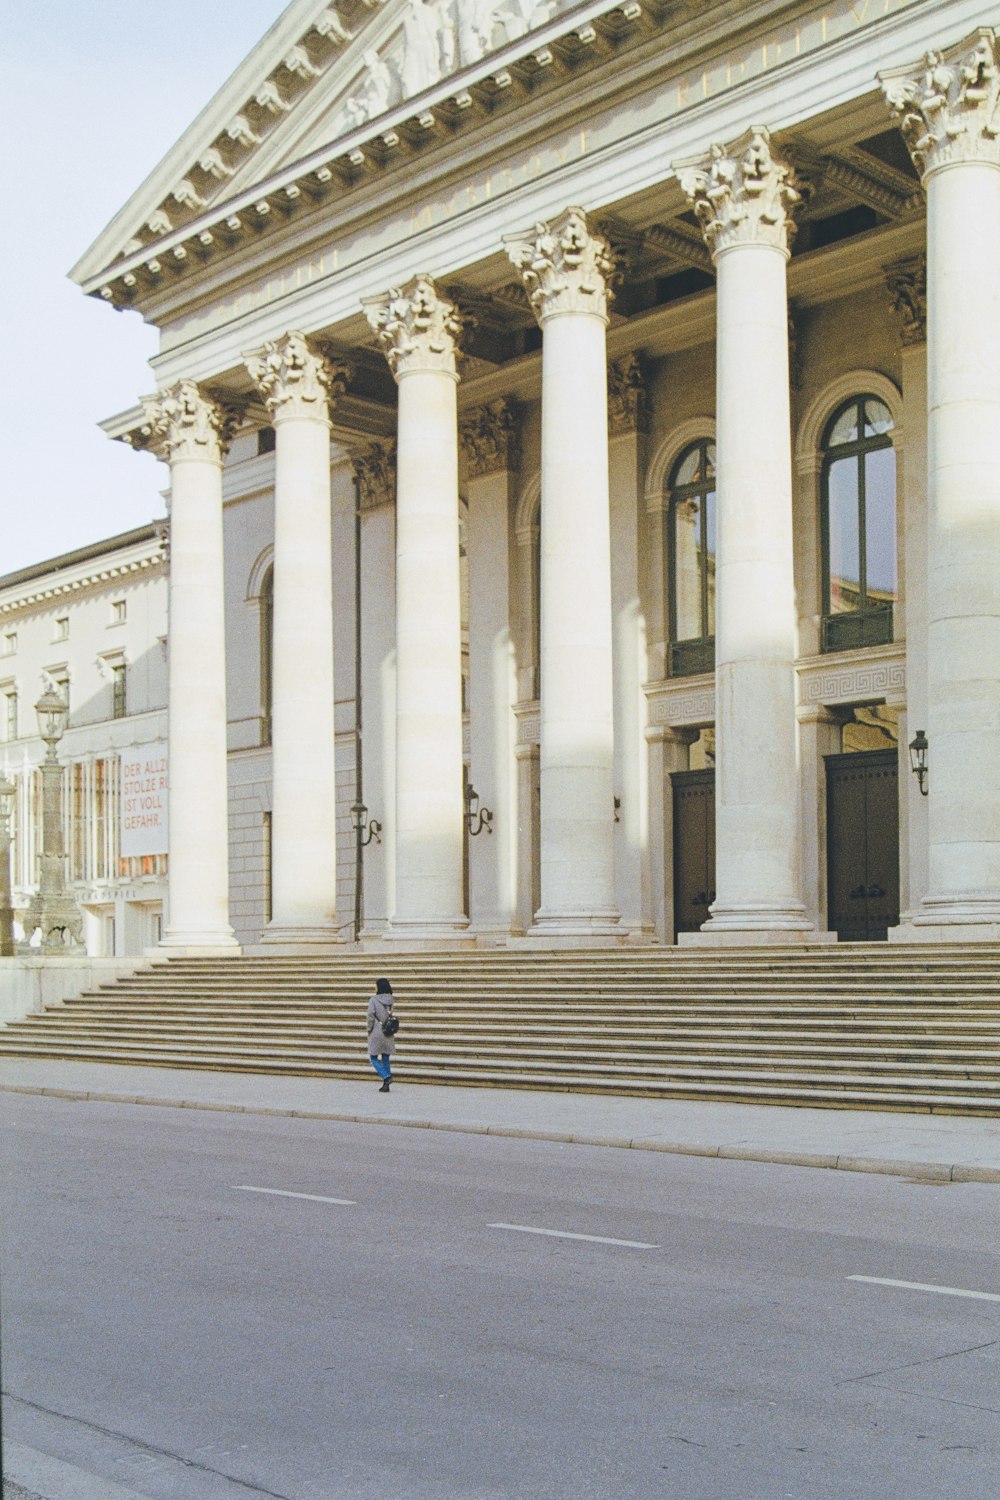 a person standing in front of a large building